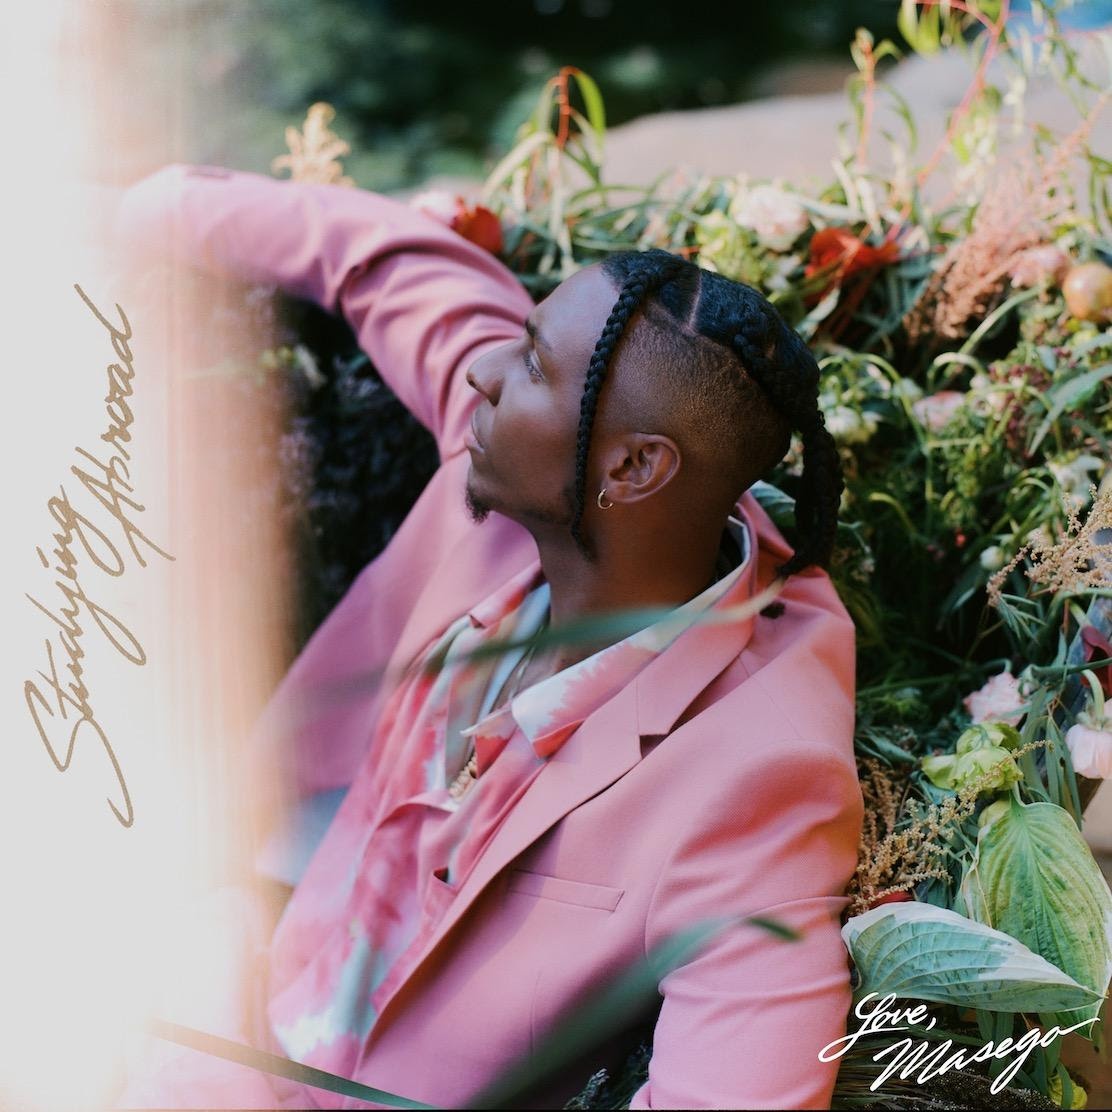 Masego's new EP "Studying Abroad" is here!